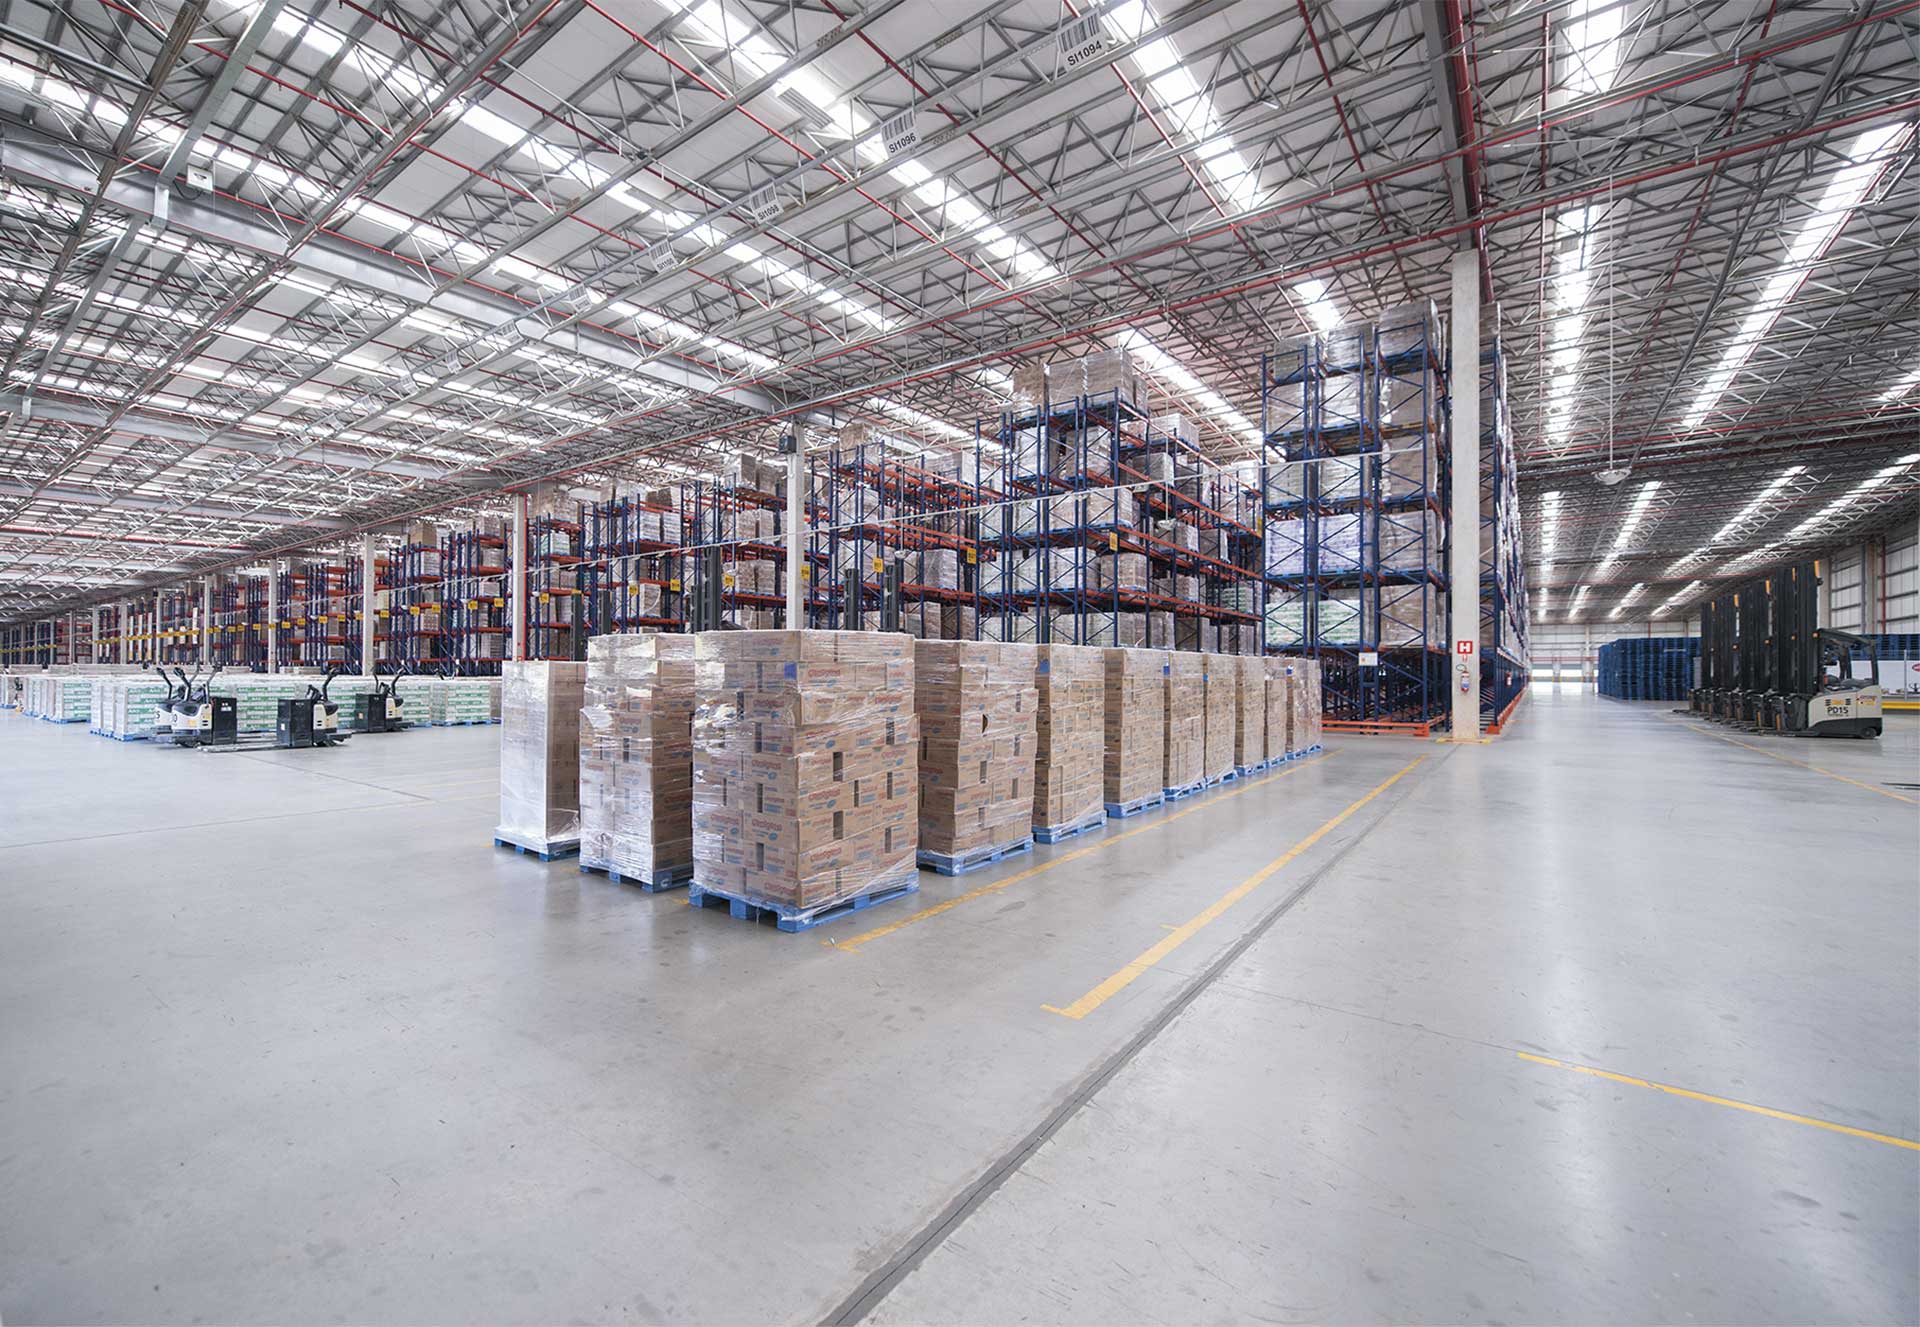 Companies use warehouse staging areas as dispatch zones, where trucks can be loaded from the loading docks